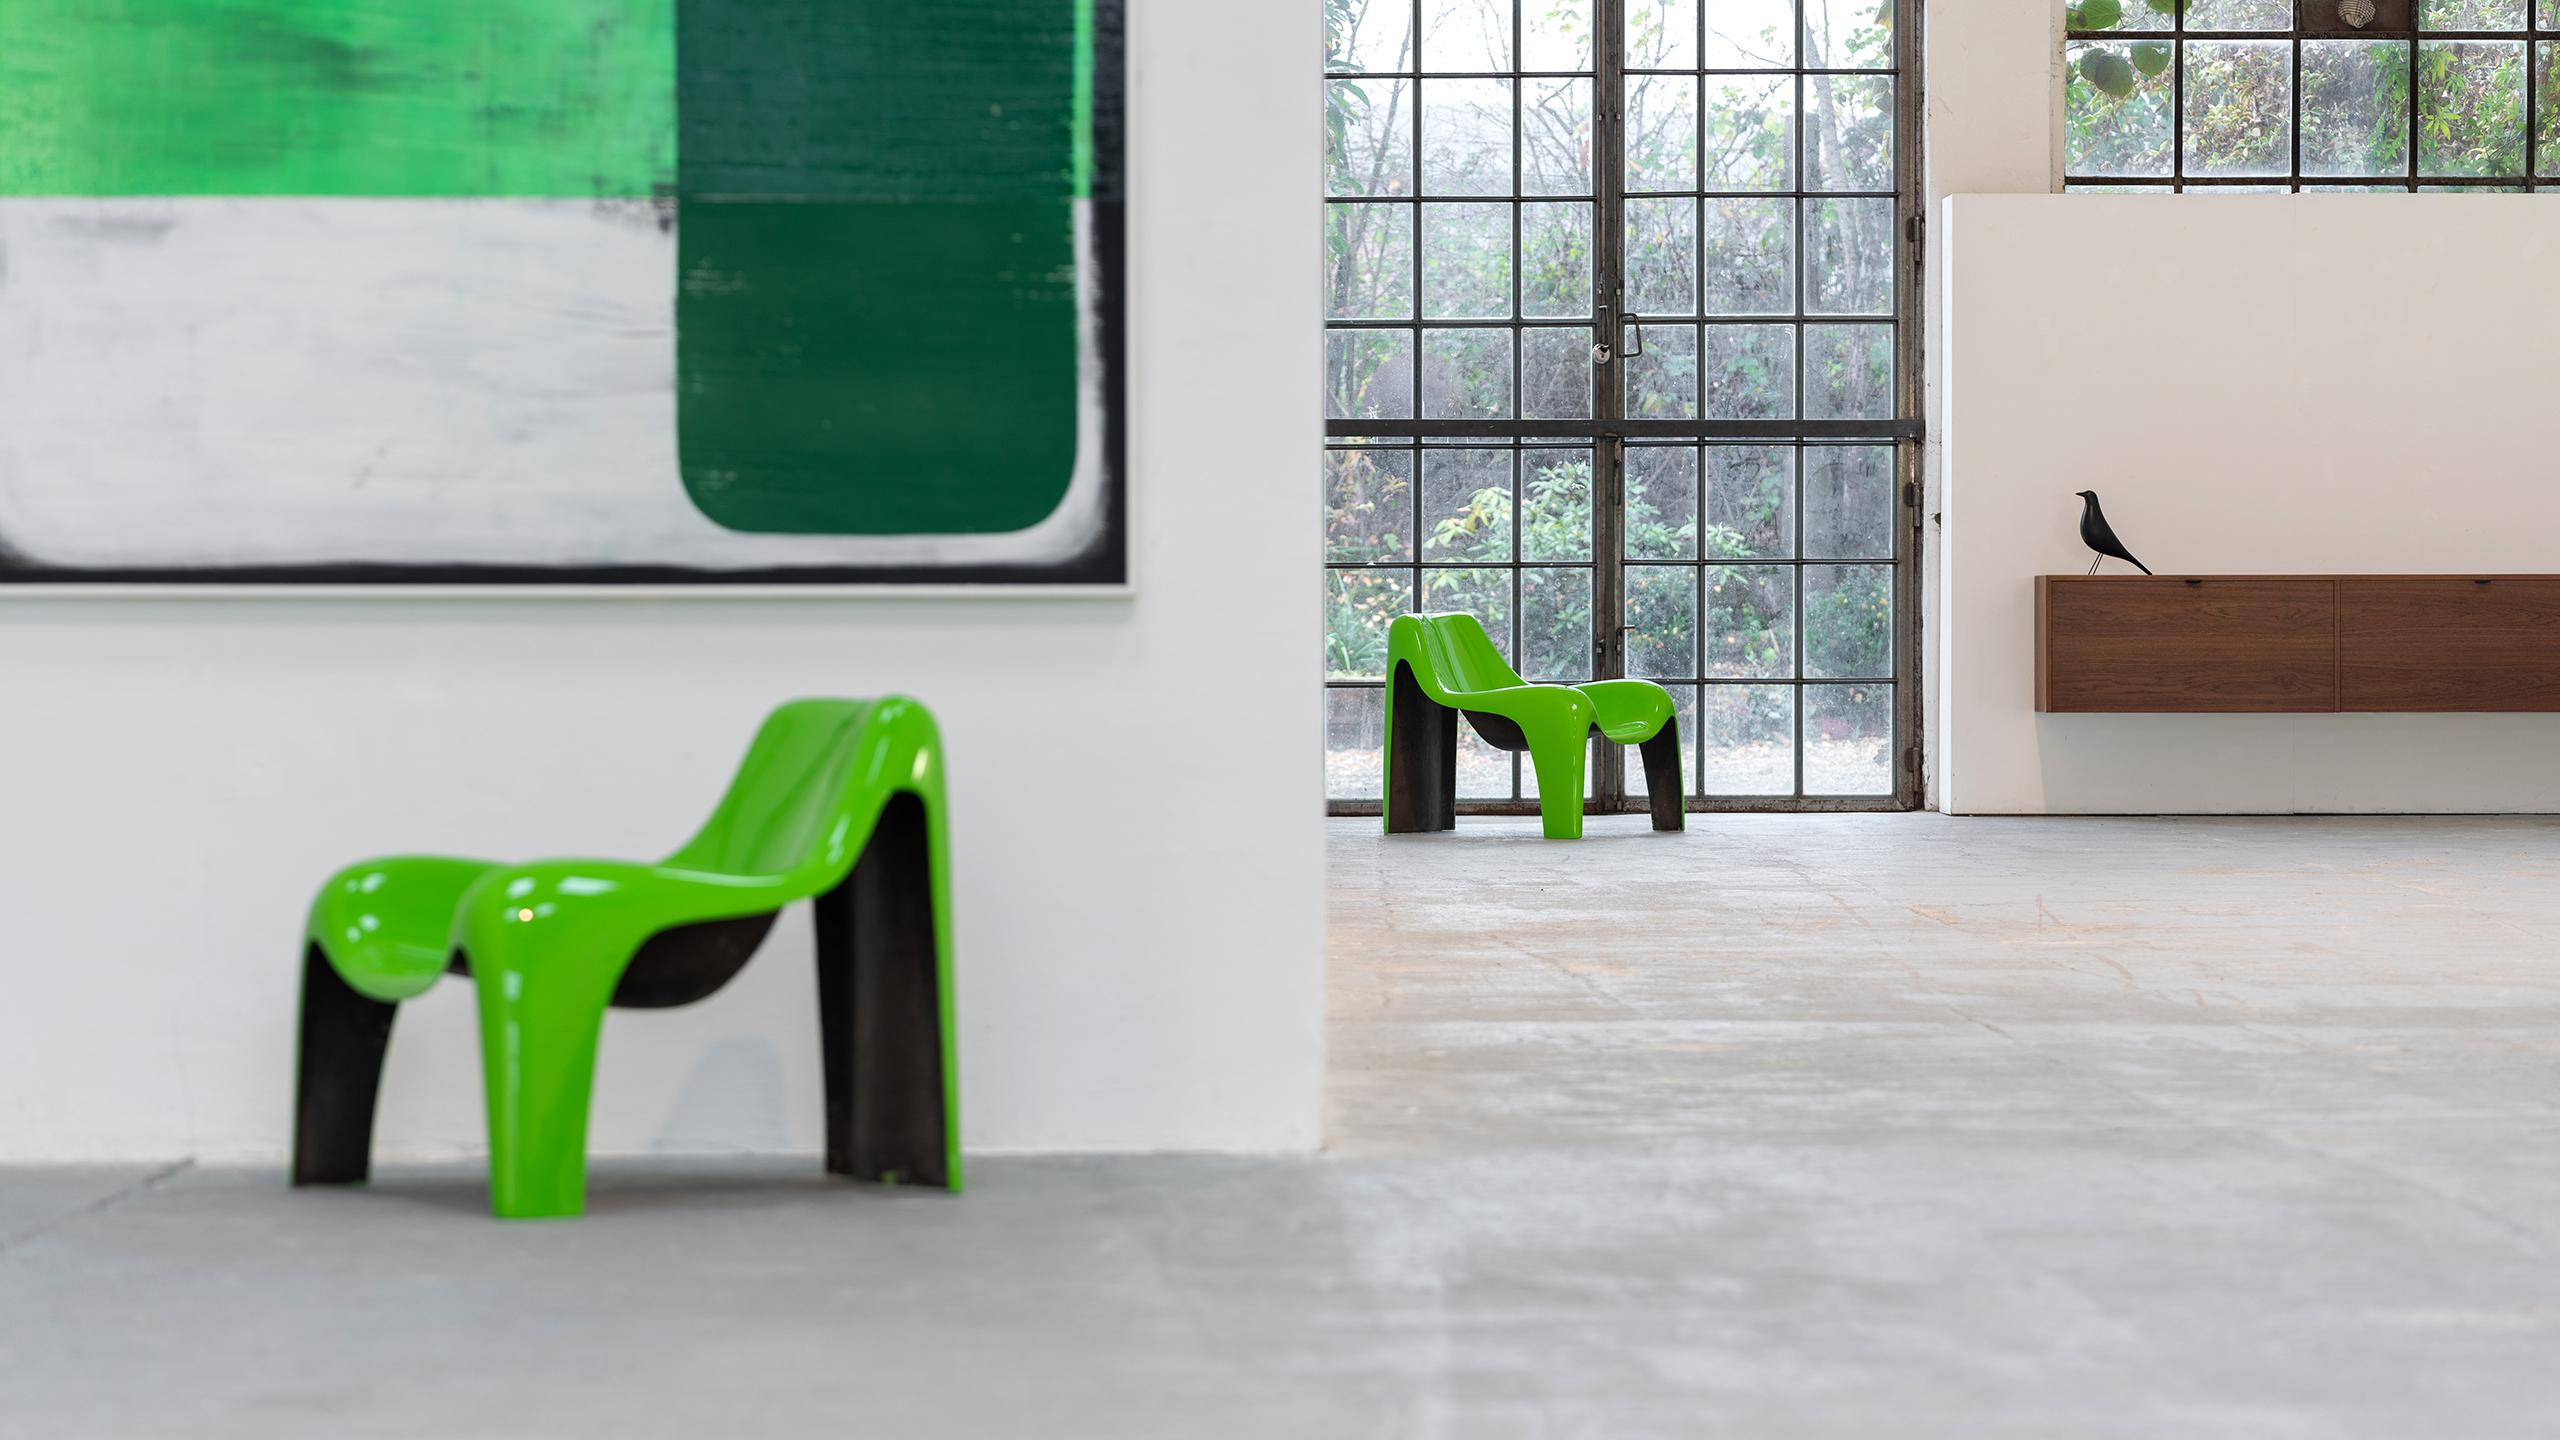 We offer 1 extemely rare fiberglass lounge chair by Luigi Colani. 
(the second chair is already sold)

ca. 1968, made for Heinz Essmann, Germany.
The chair was repainted by our lacquer master company in the original shiny green on top, the underside